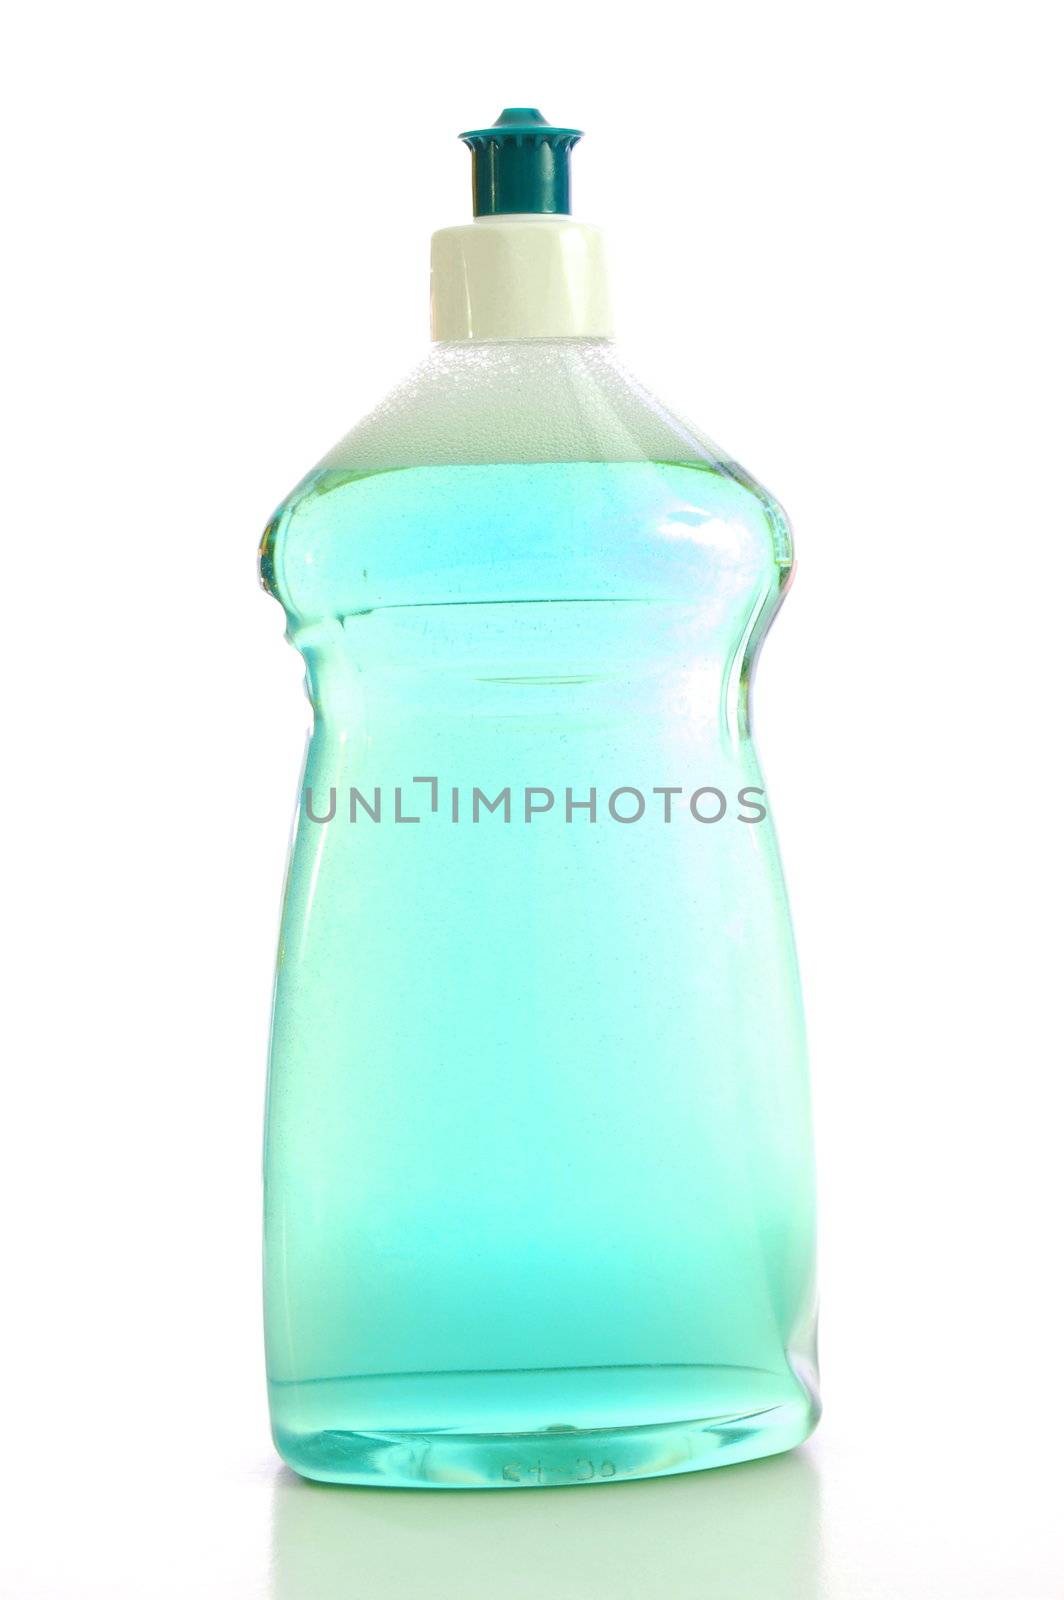 housekeeping with soap spray bottle for hygiene